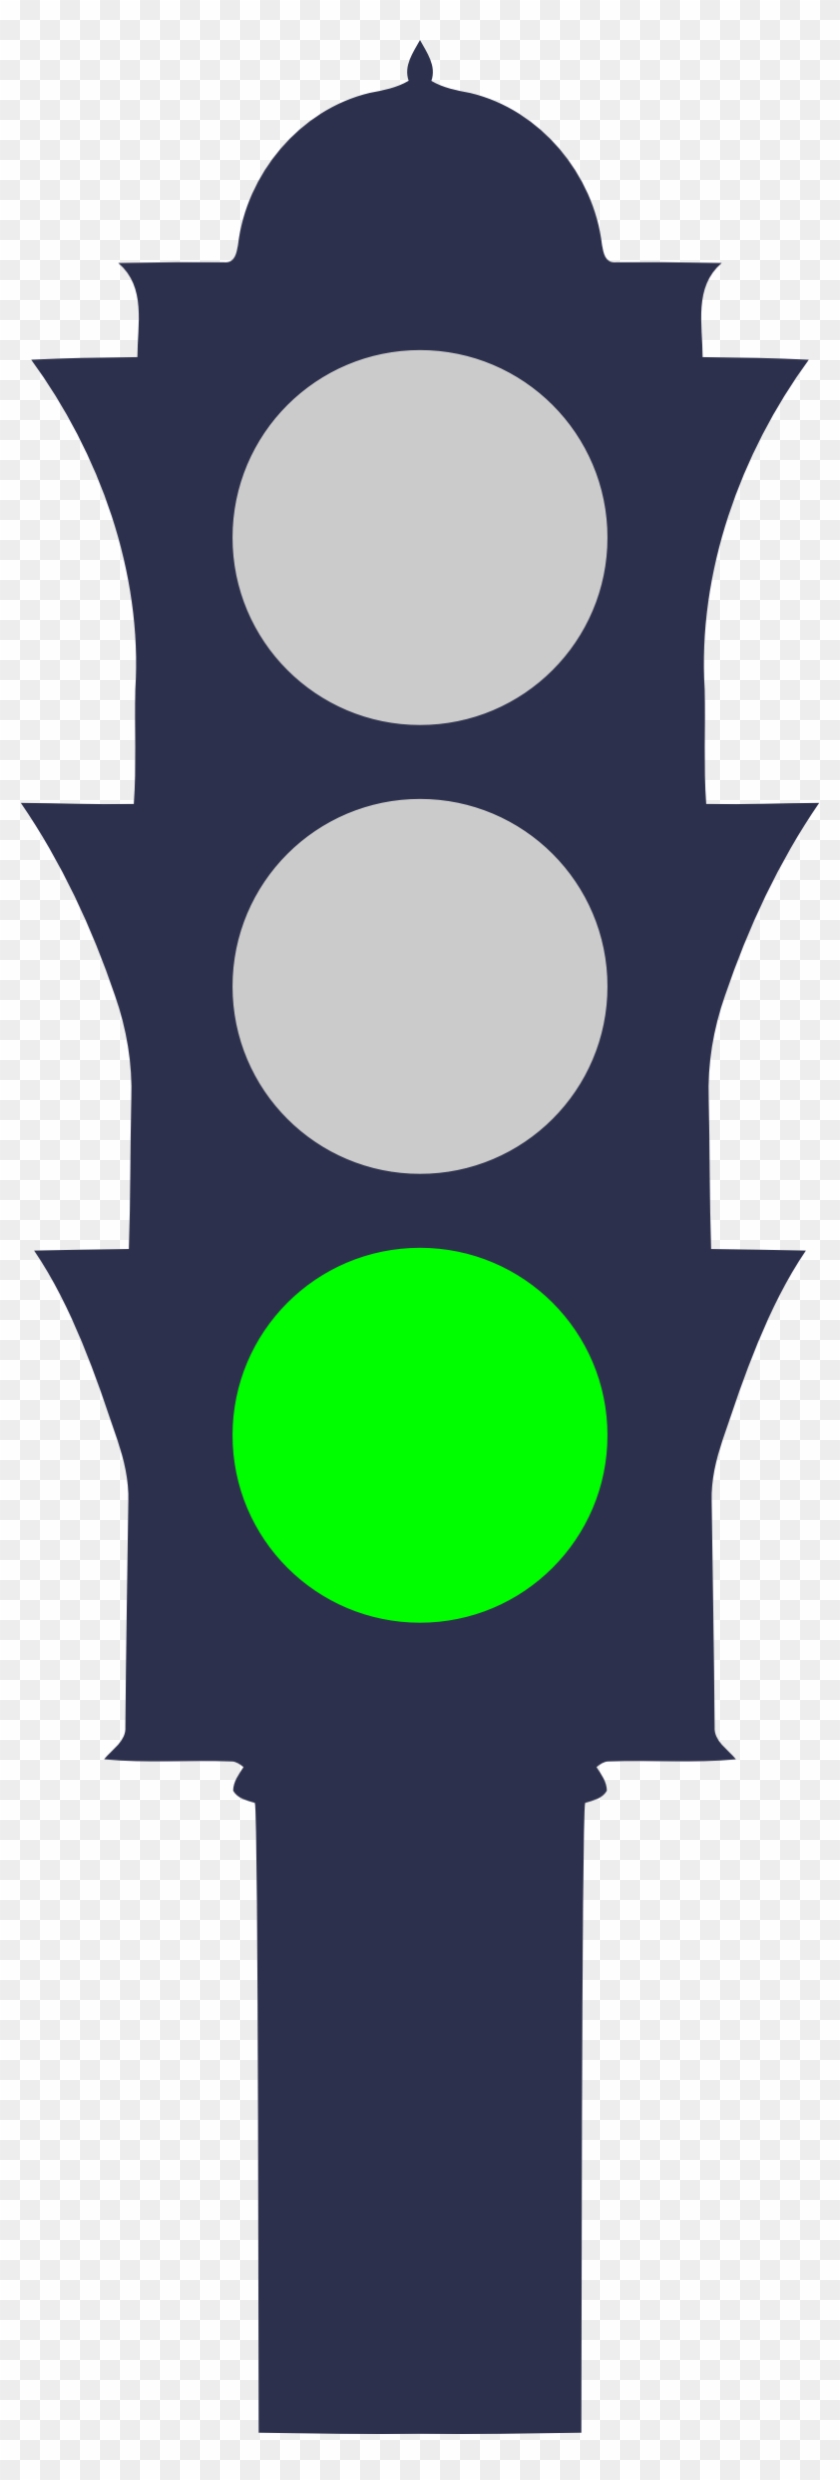 Affordable Clipart Traffic Light Green For Indicator - Affordable Clipart Traffic Light Green For Indicator #292852